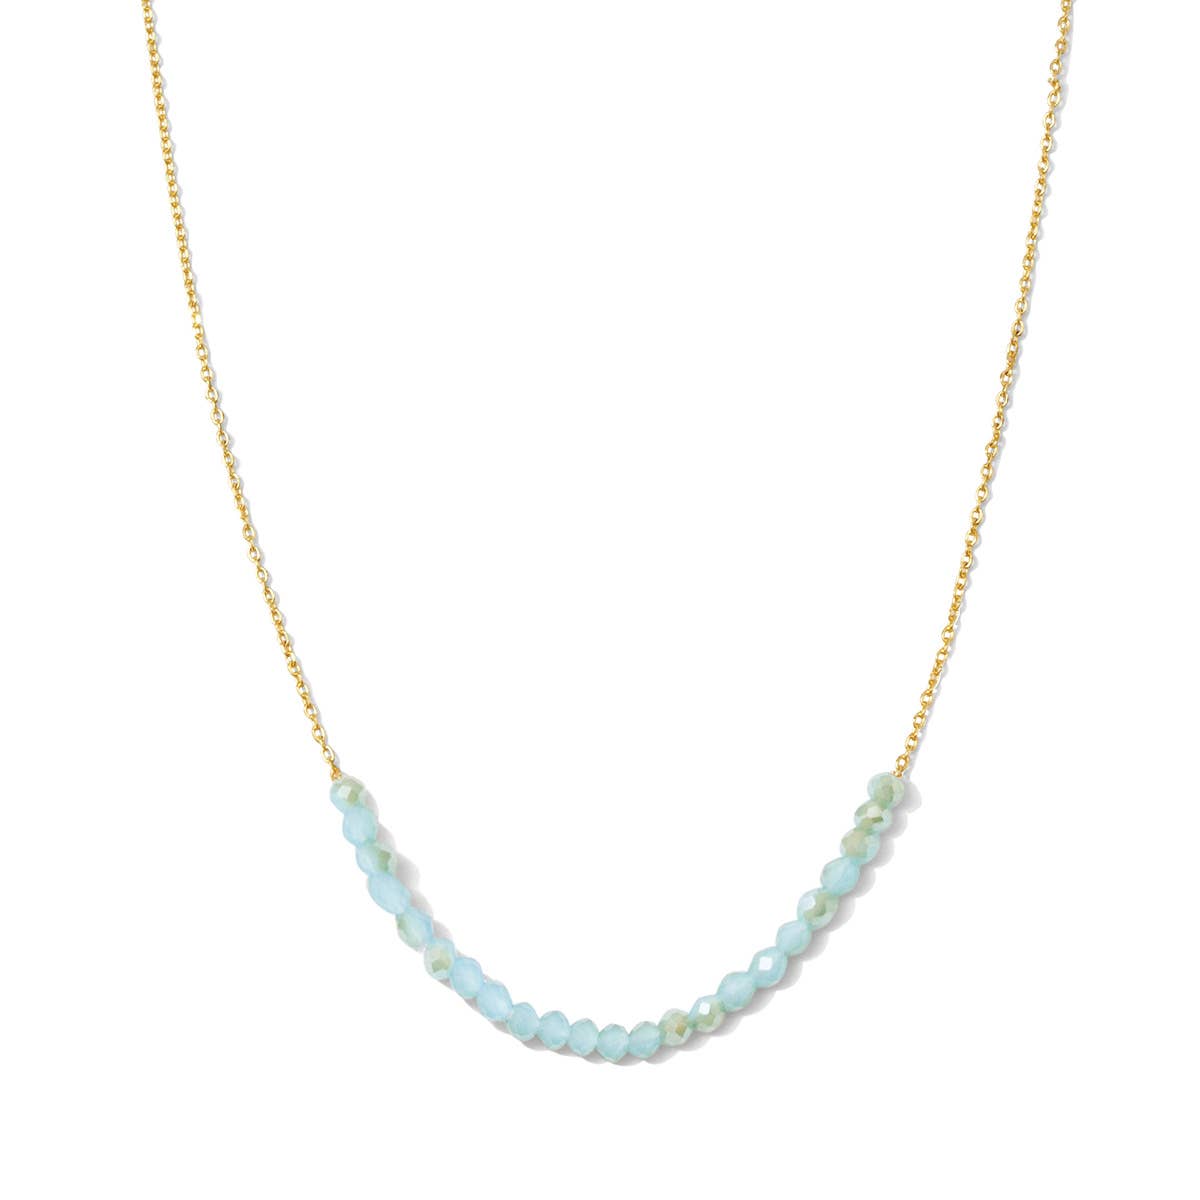 Splendid Iris - Delicate Crystal Accented Necklace: Green